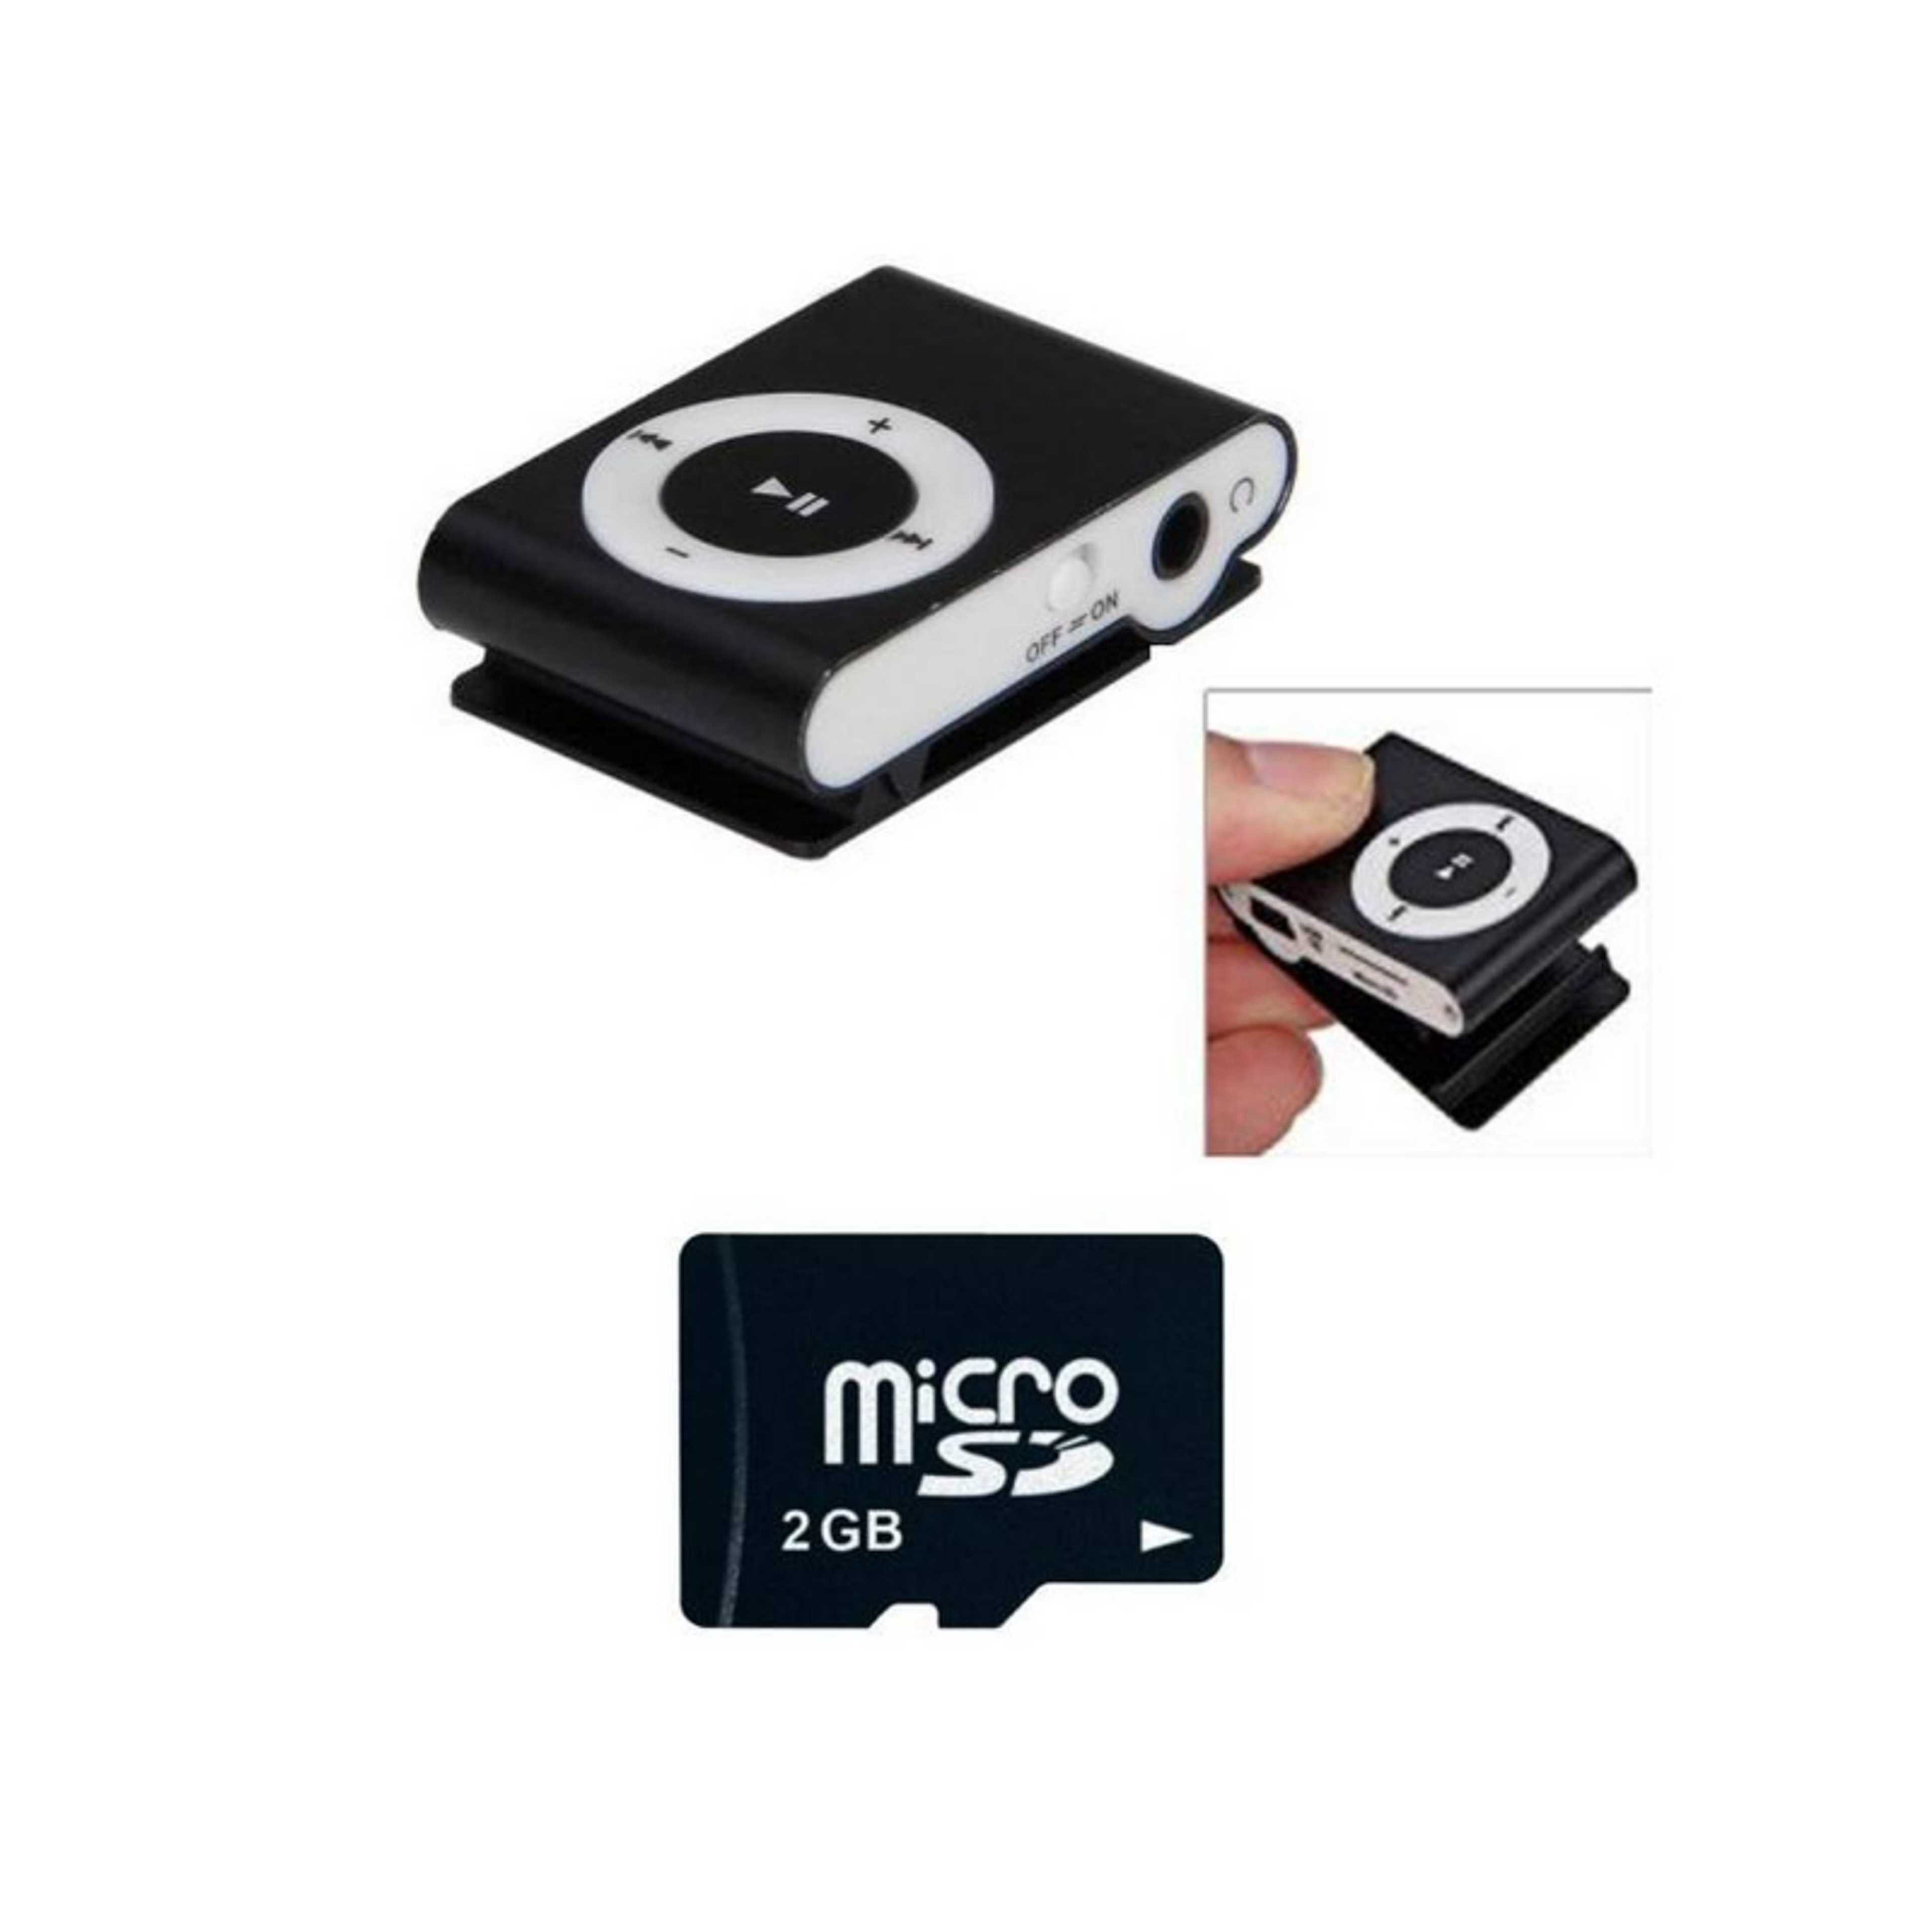 Shuffle MP3 Player with 2GB Memory Card